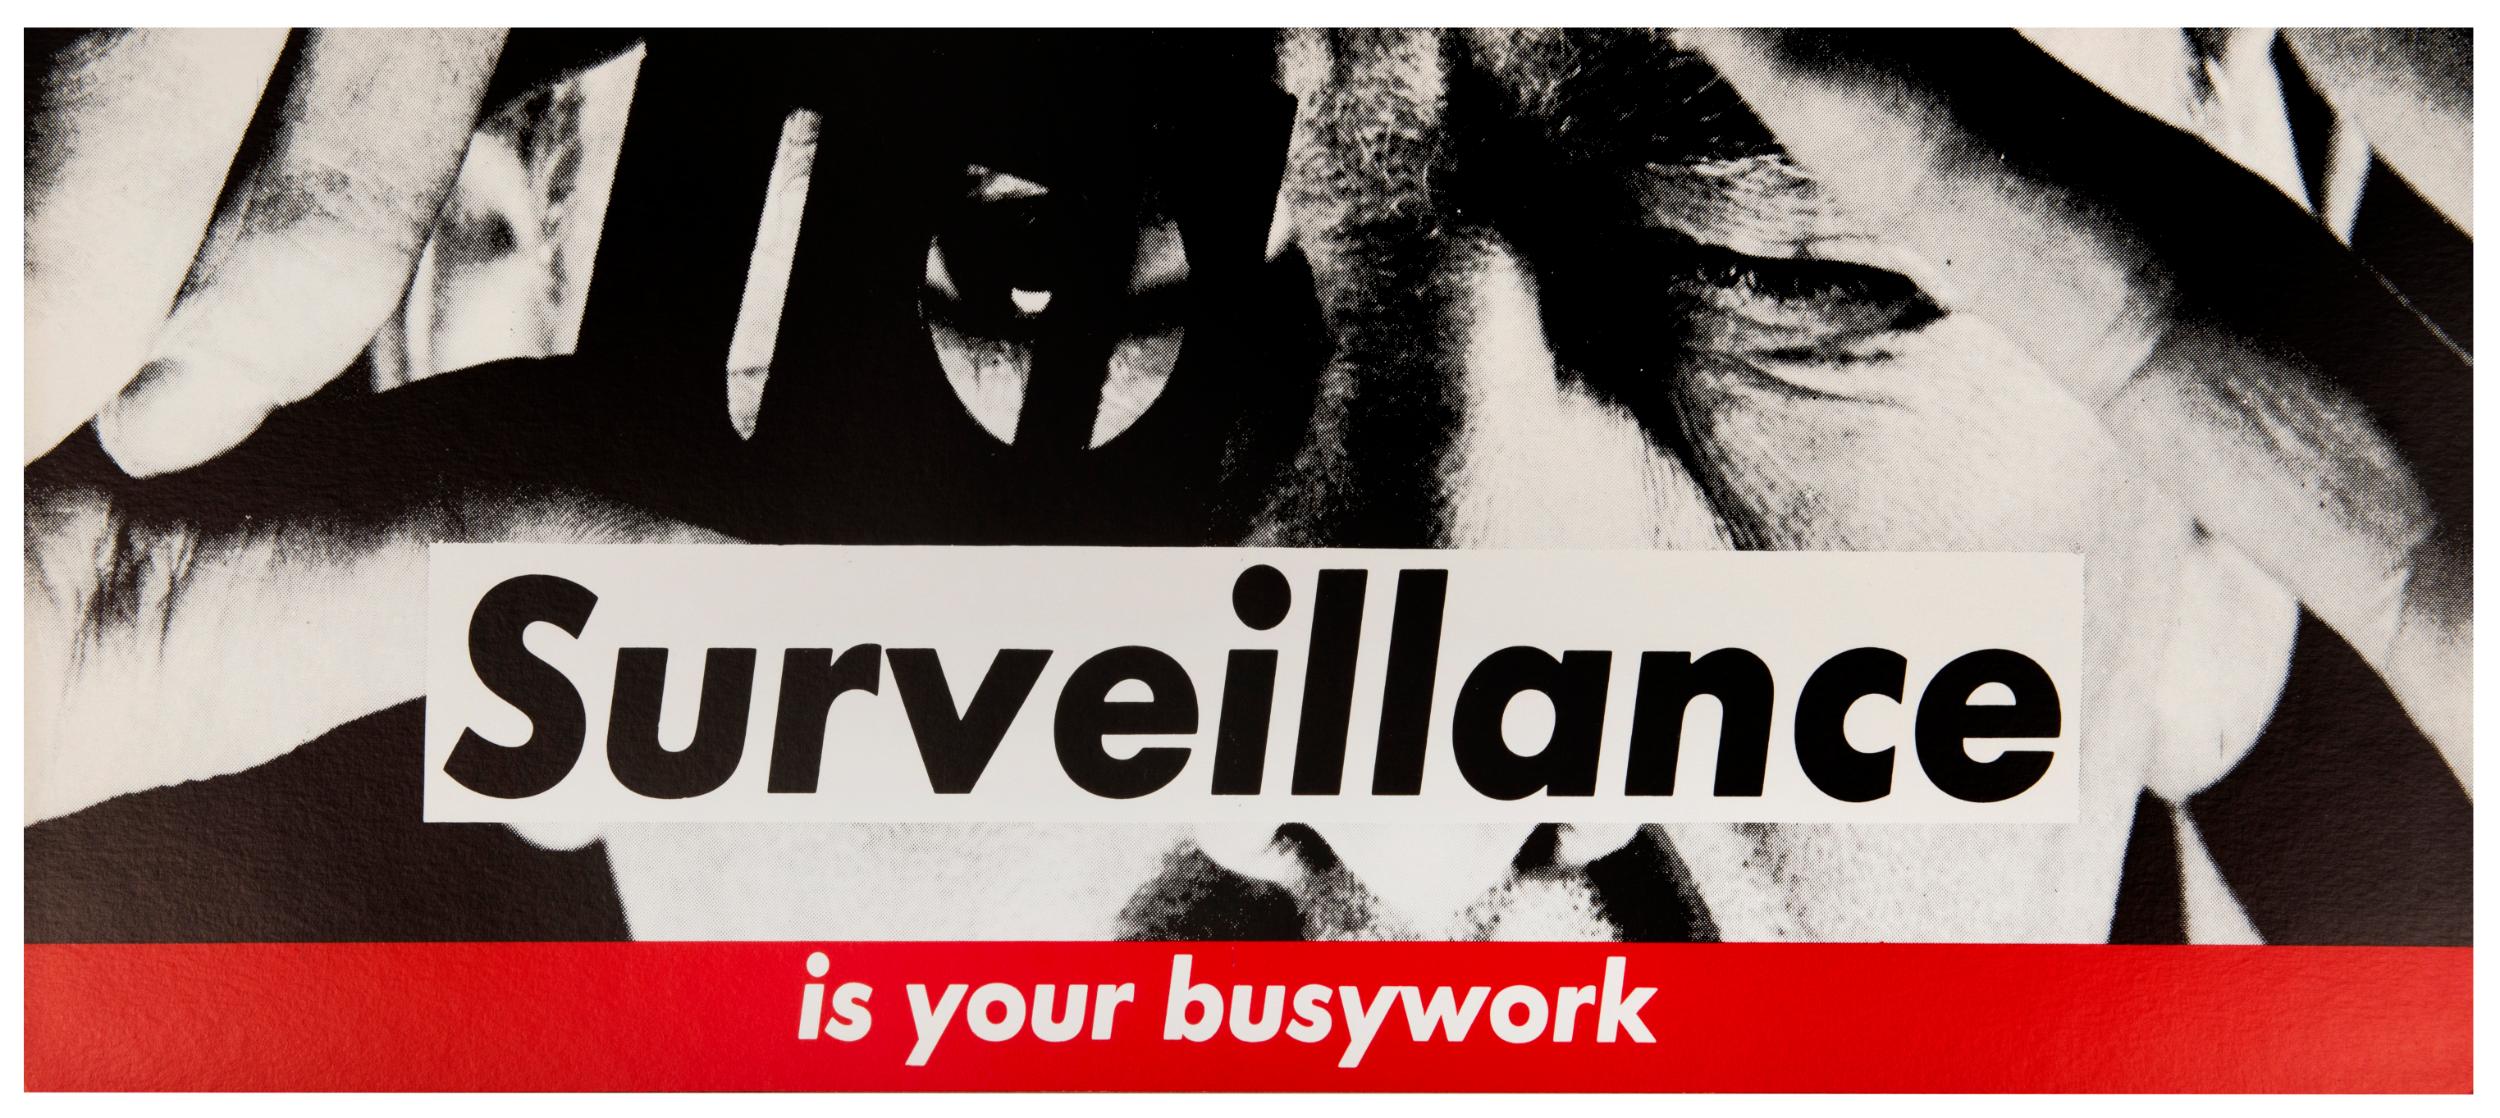 'Surveillance Is Your Busywork'